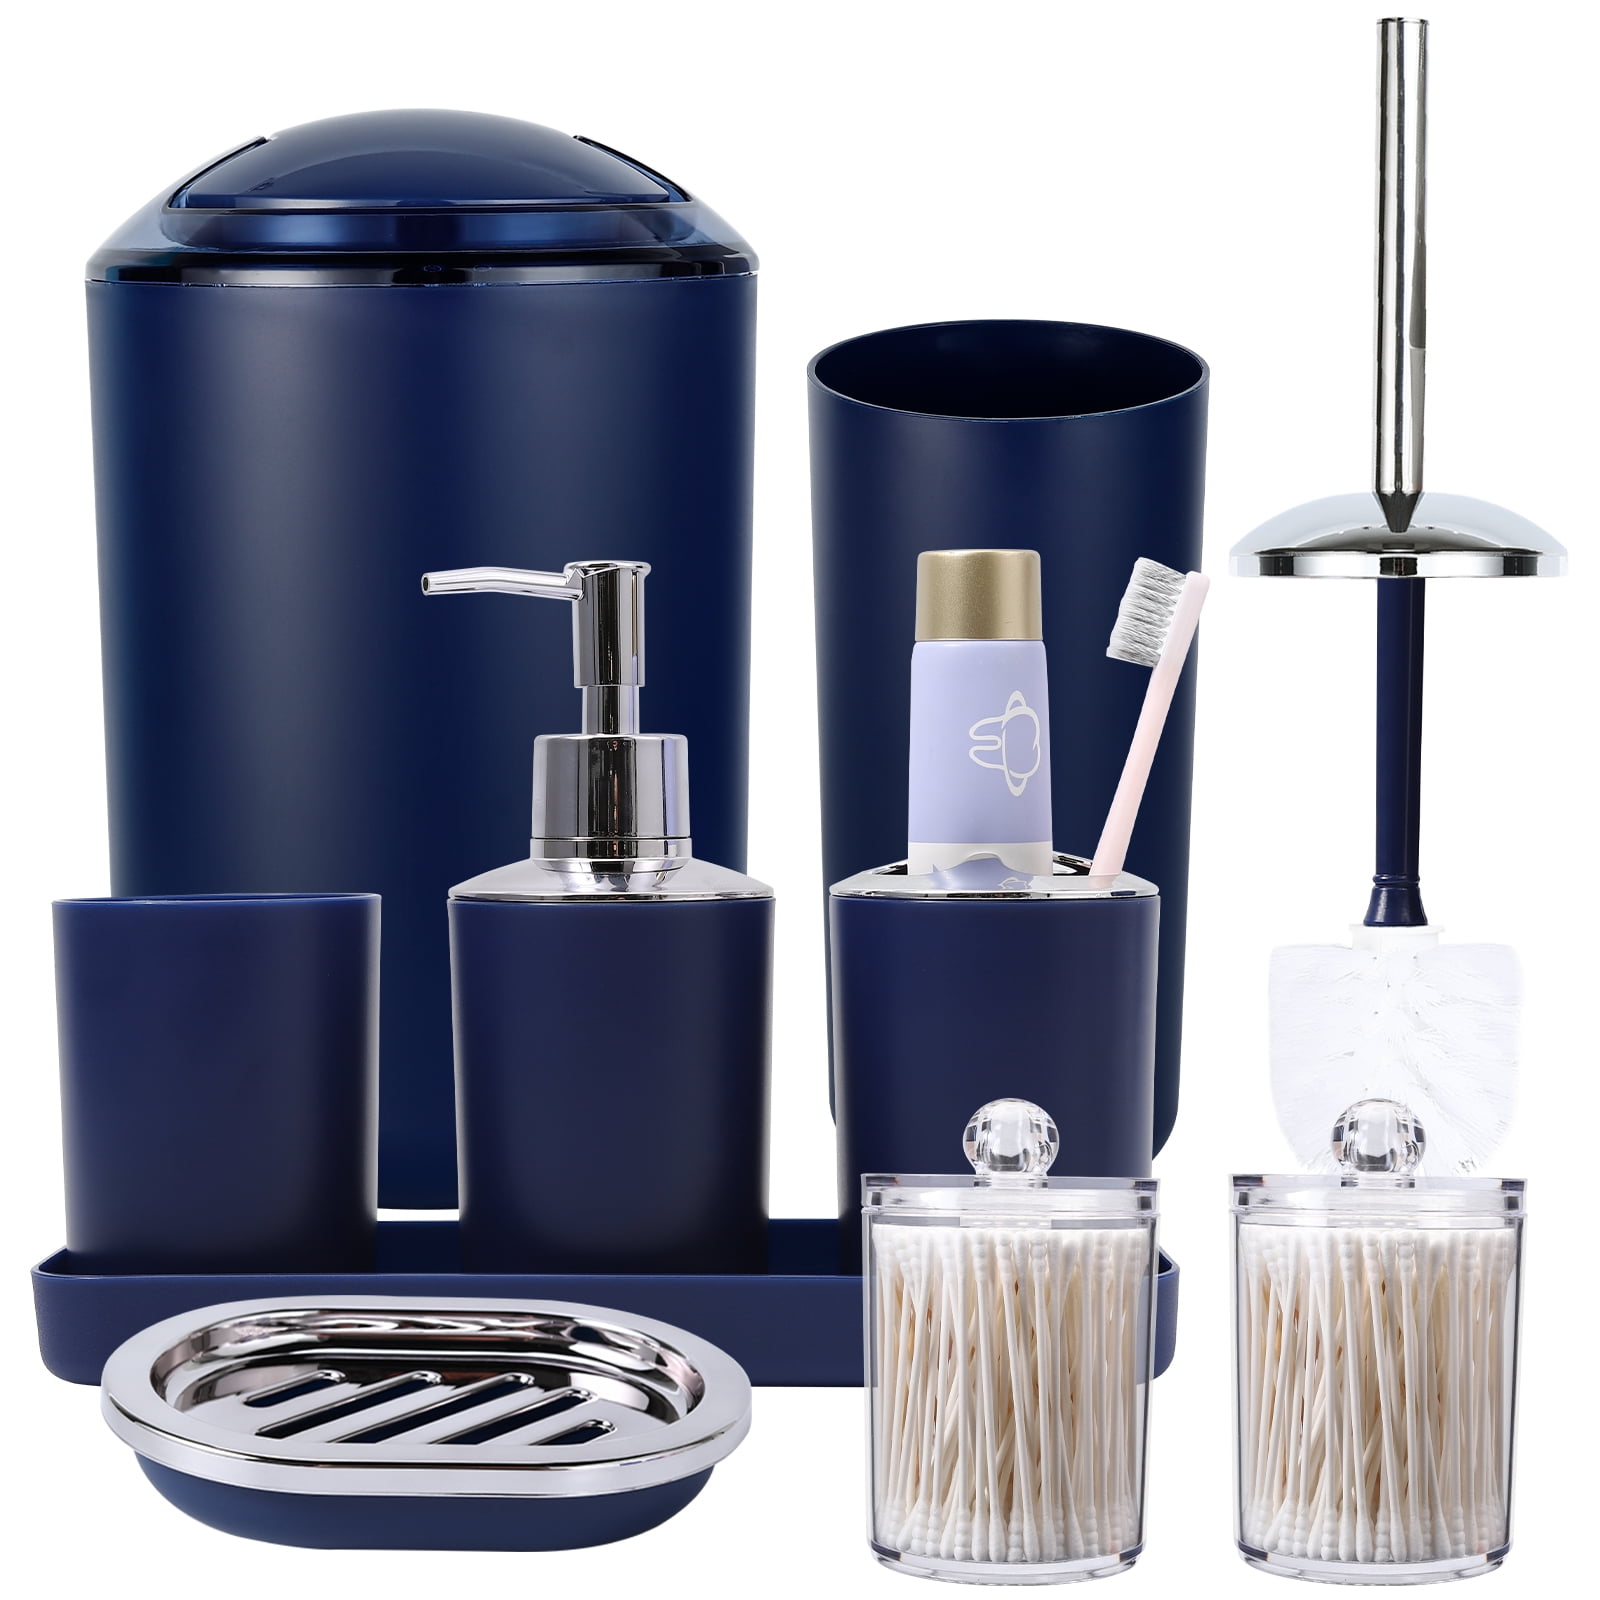 iMucci Navy Blue Bathroom Accessories Set of 8, with Toothbrush  Holder,Toothbrush Cup,Soap Dispenser,Soap Dish,Toilet Brush Holder,Trash  Can,Cotton Swab Box,Plastic Bathroom Set for Home and Bathroom 